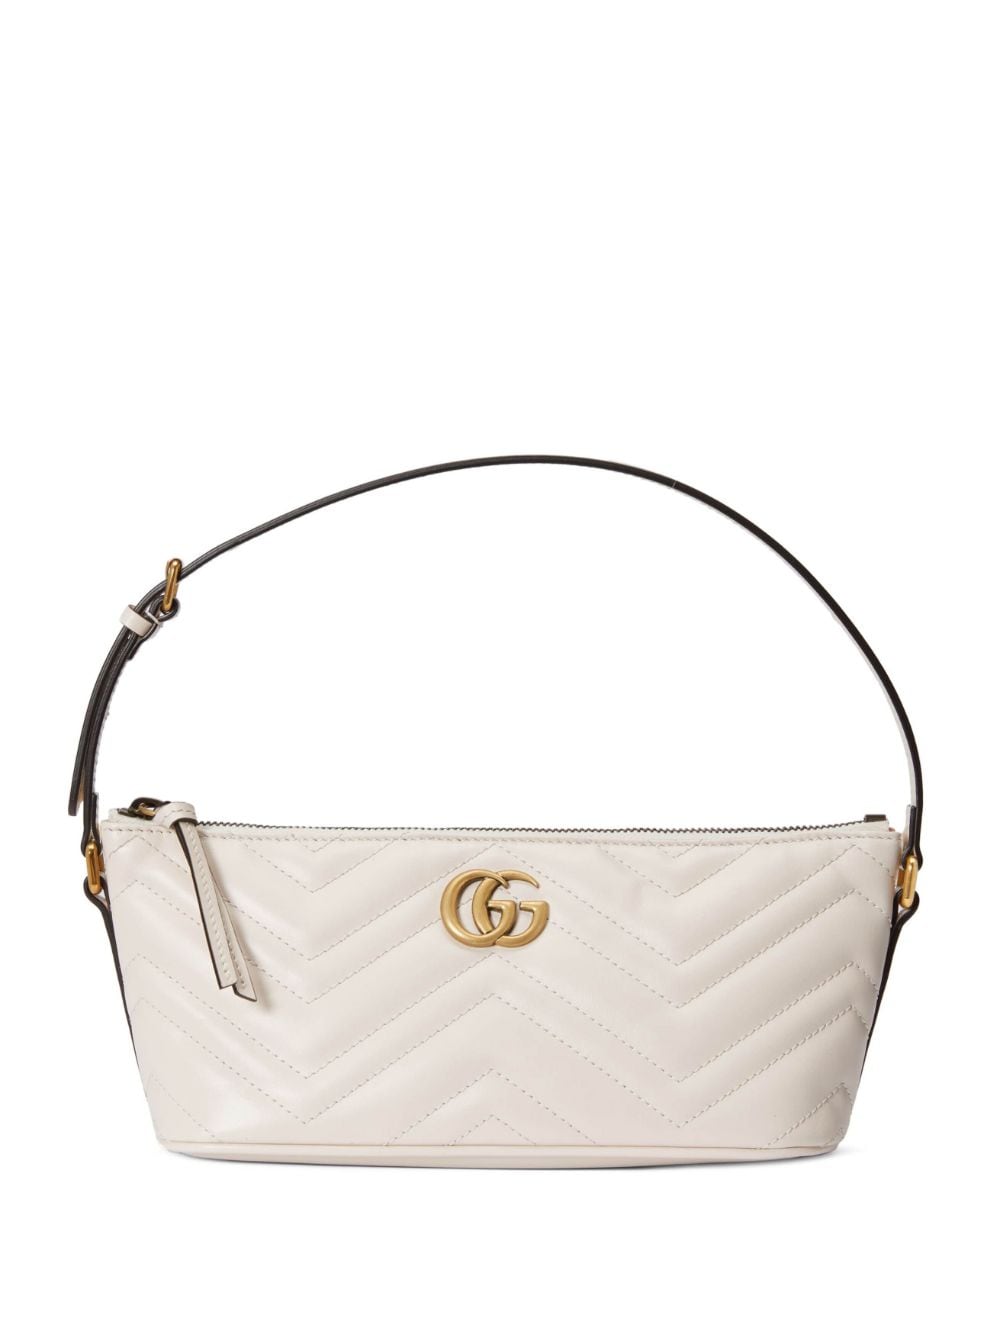 Gucci Gg Marmont Leather Shoulder Bag In Weiss